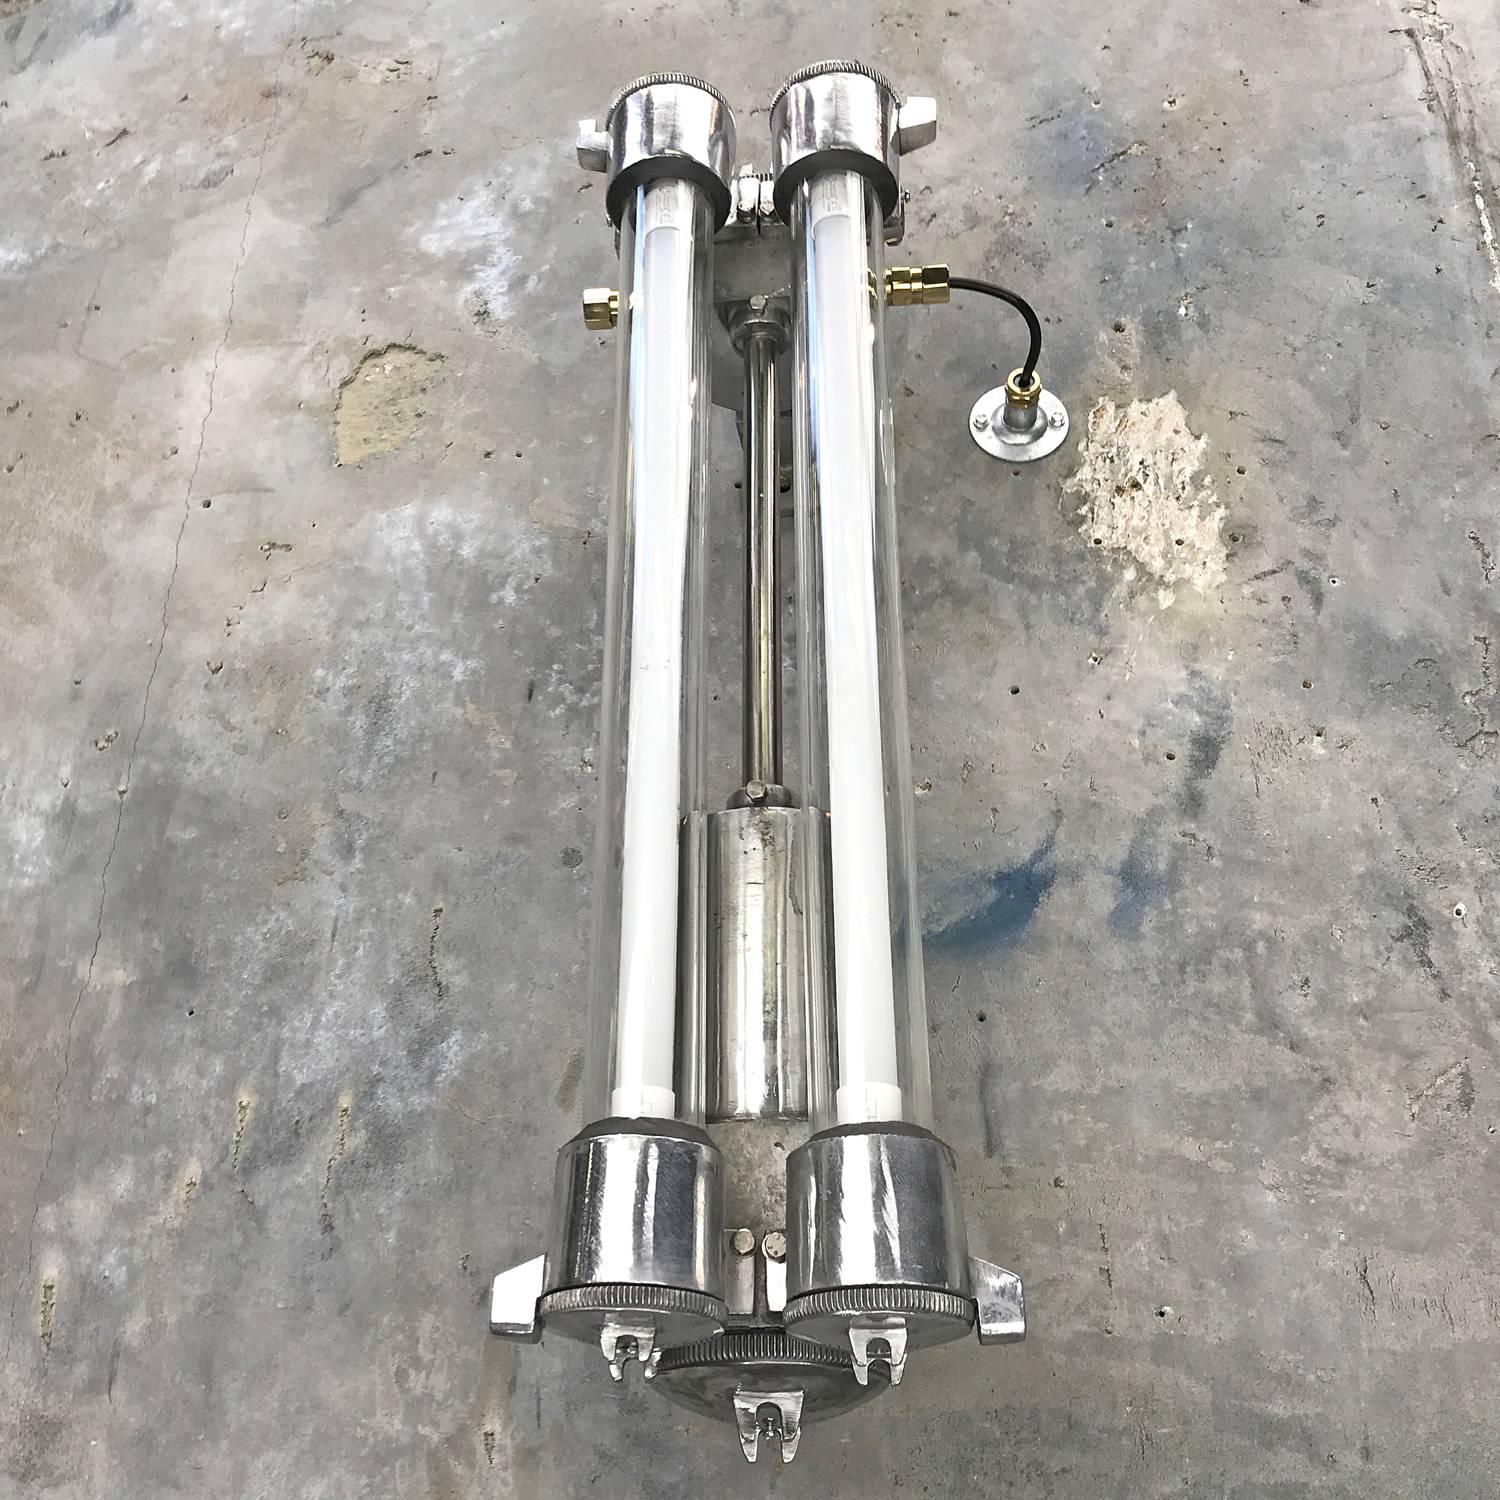 1970s Flame Proof Industrial Cast Aluminium, Glass and Brass Wall Light In Excellent Condition For Sale In Leicester, Leicestershire